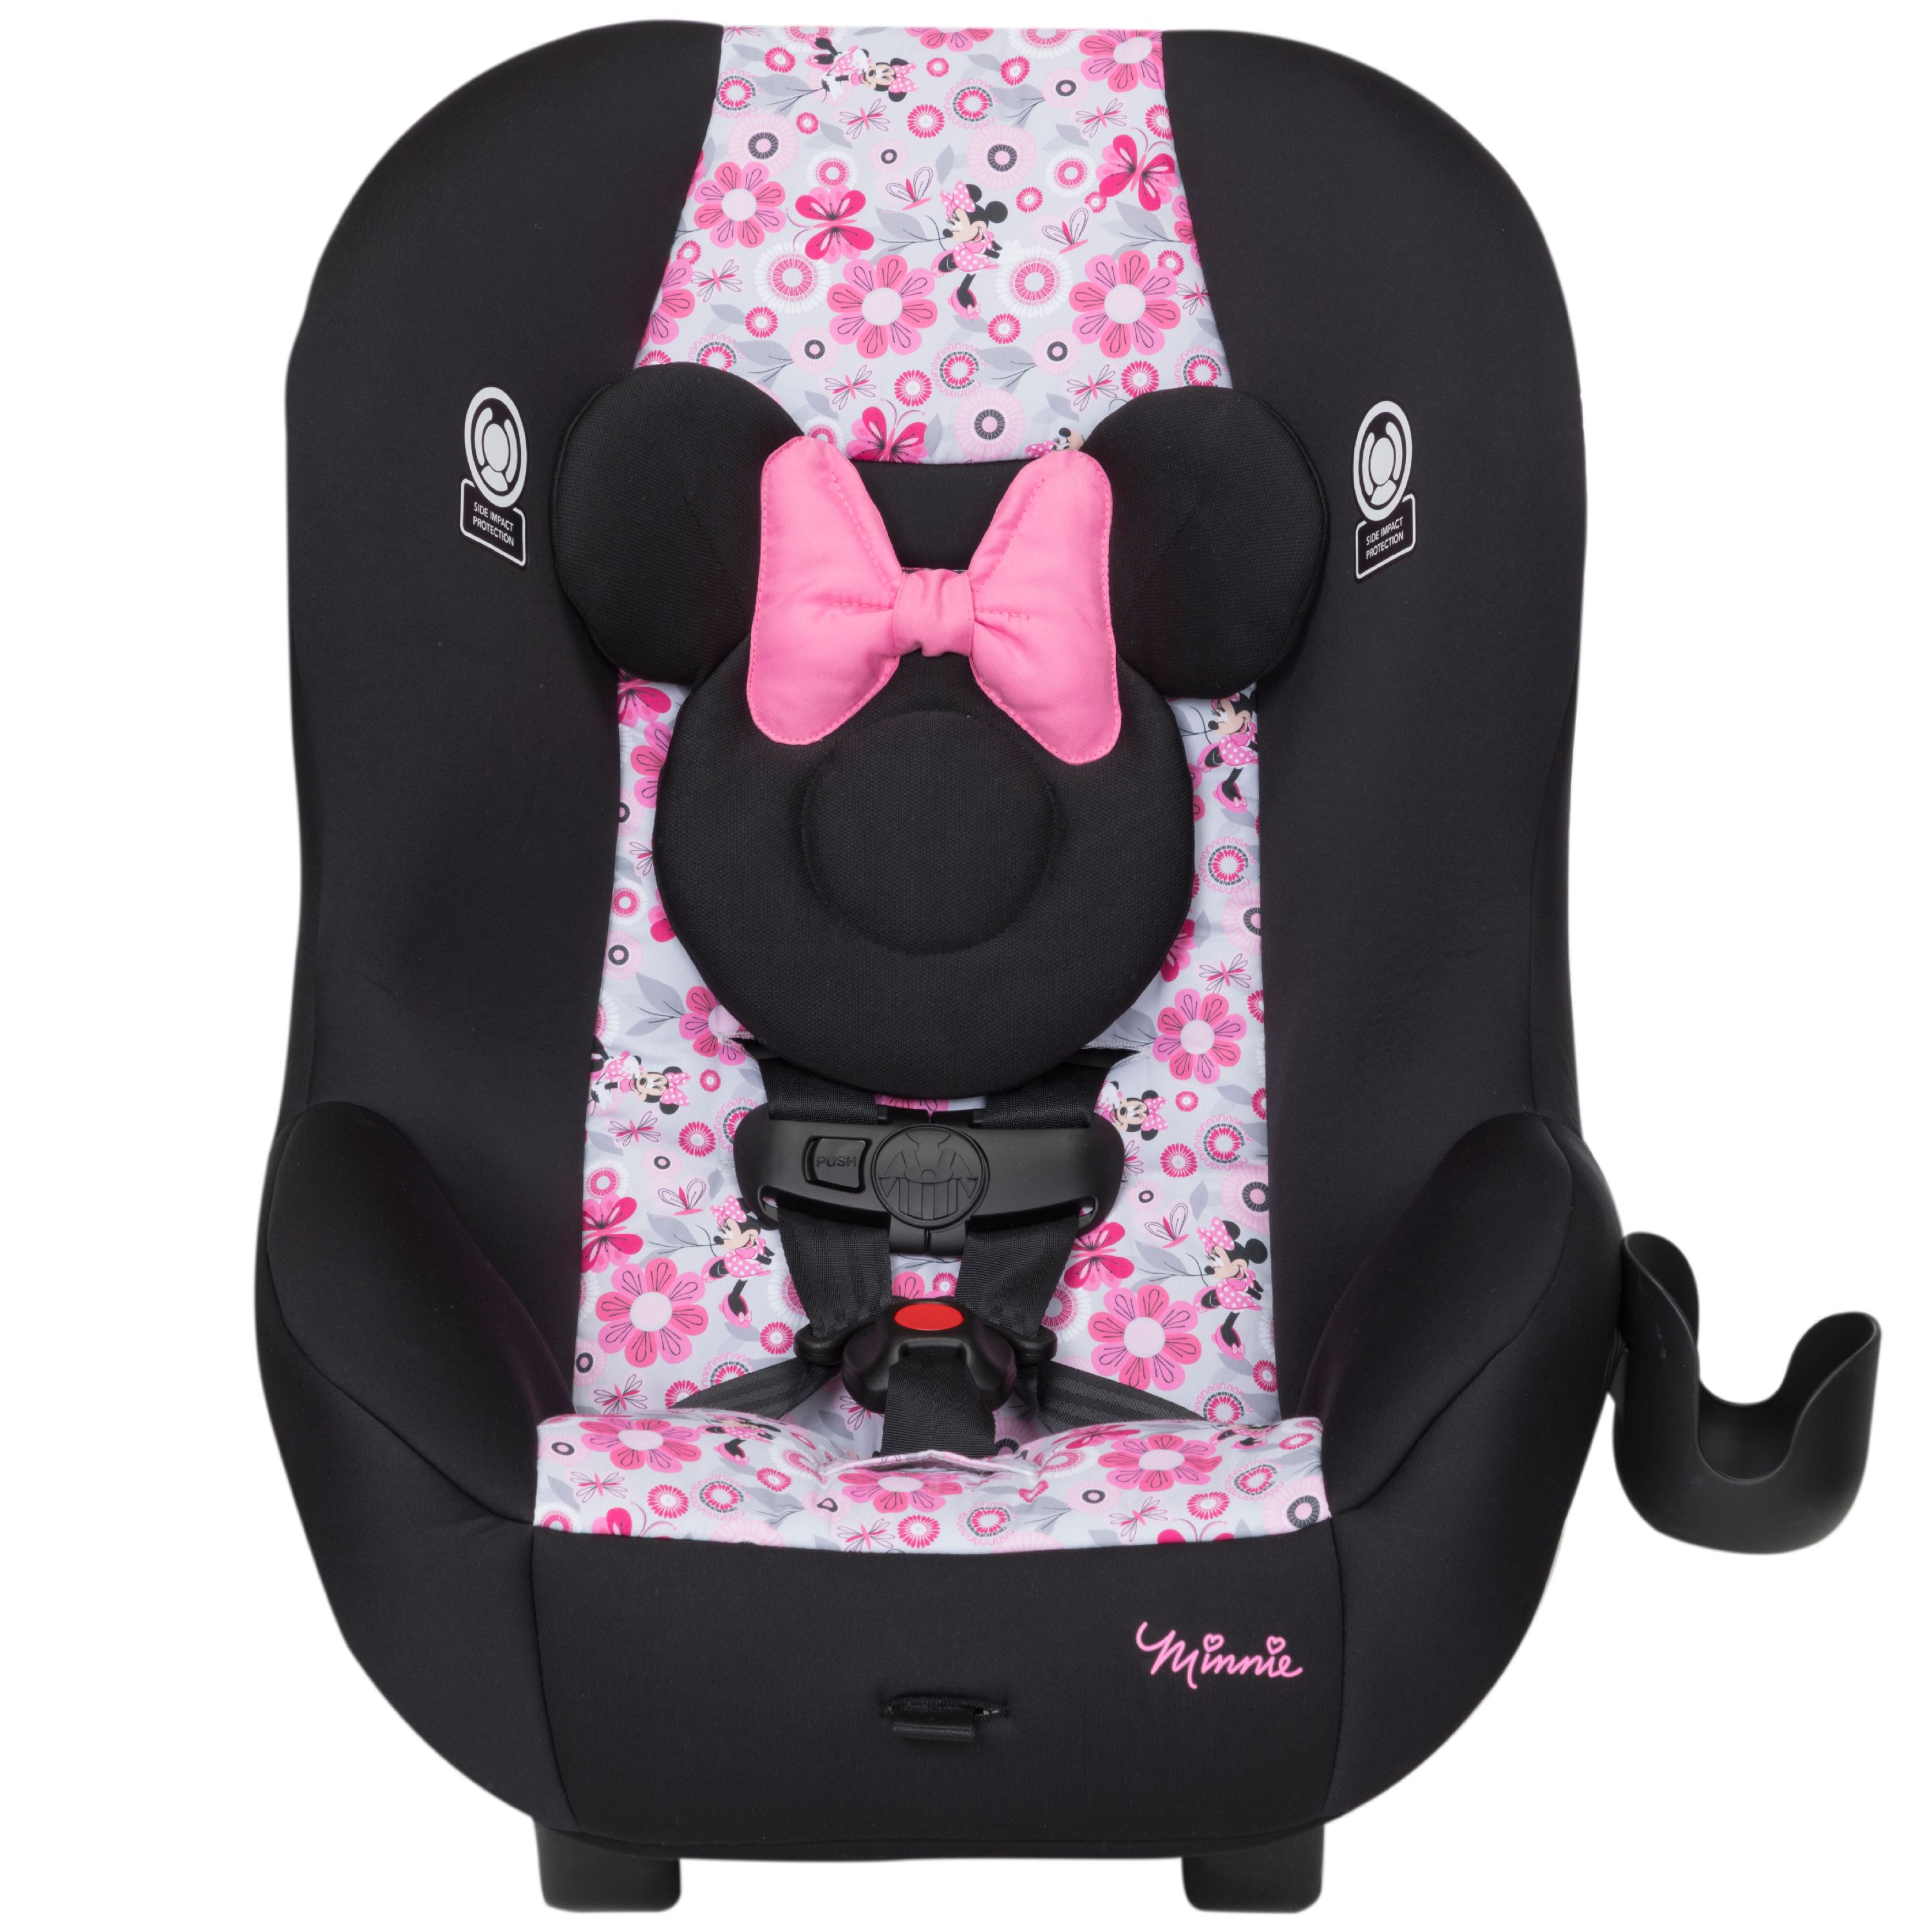 Disney Baby Scenera NEXT Luxe Convertible Car Seat, Minnie Meadow - image 3 of 15